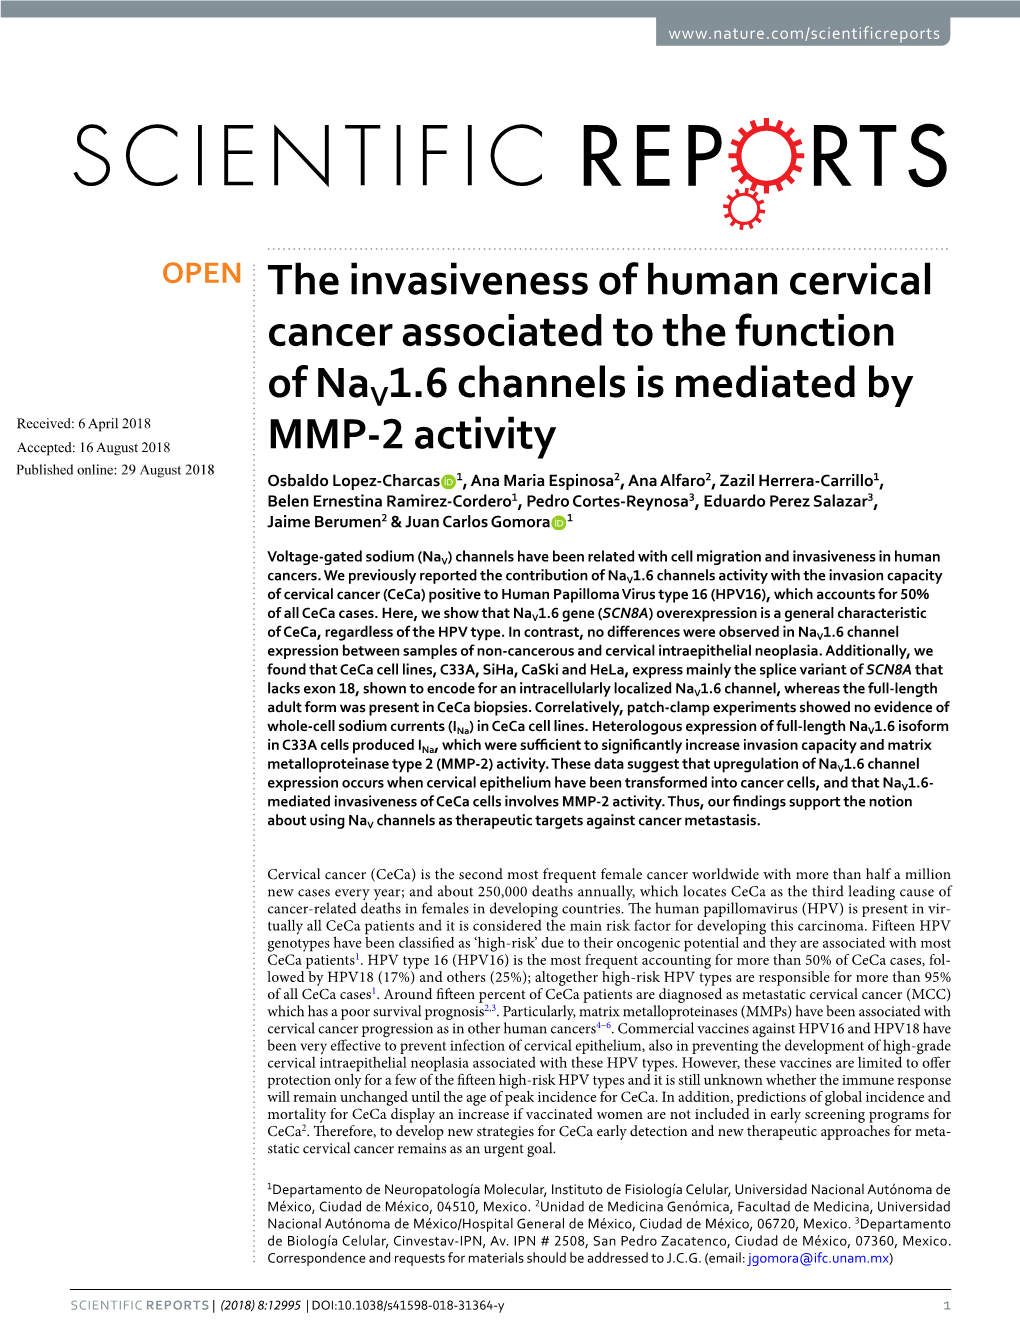 The Invasiveness of Human Cervical Cancer Associated to the Function Of